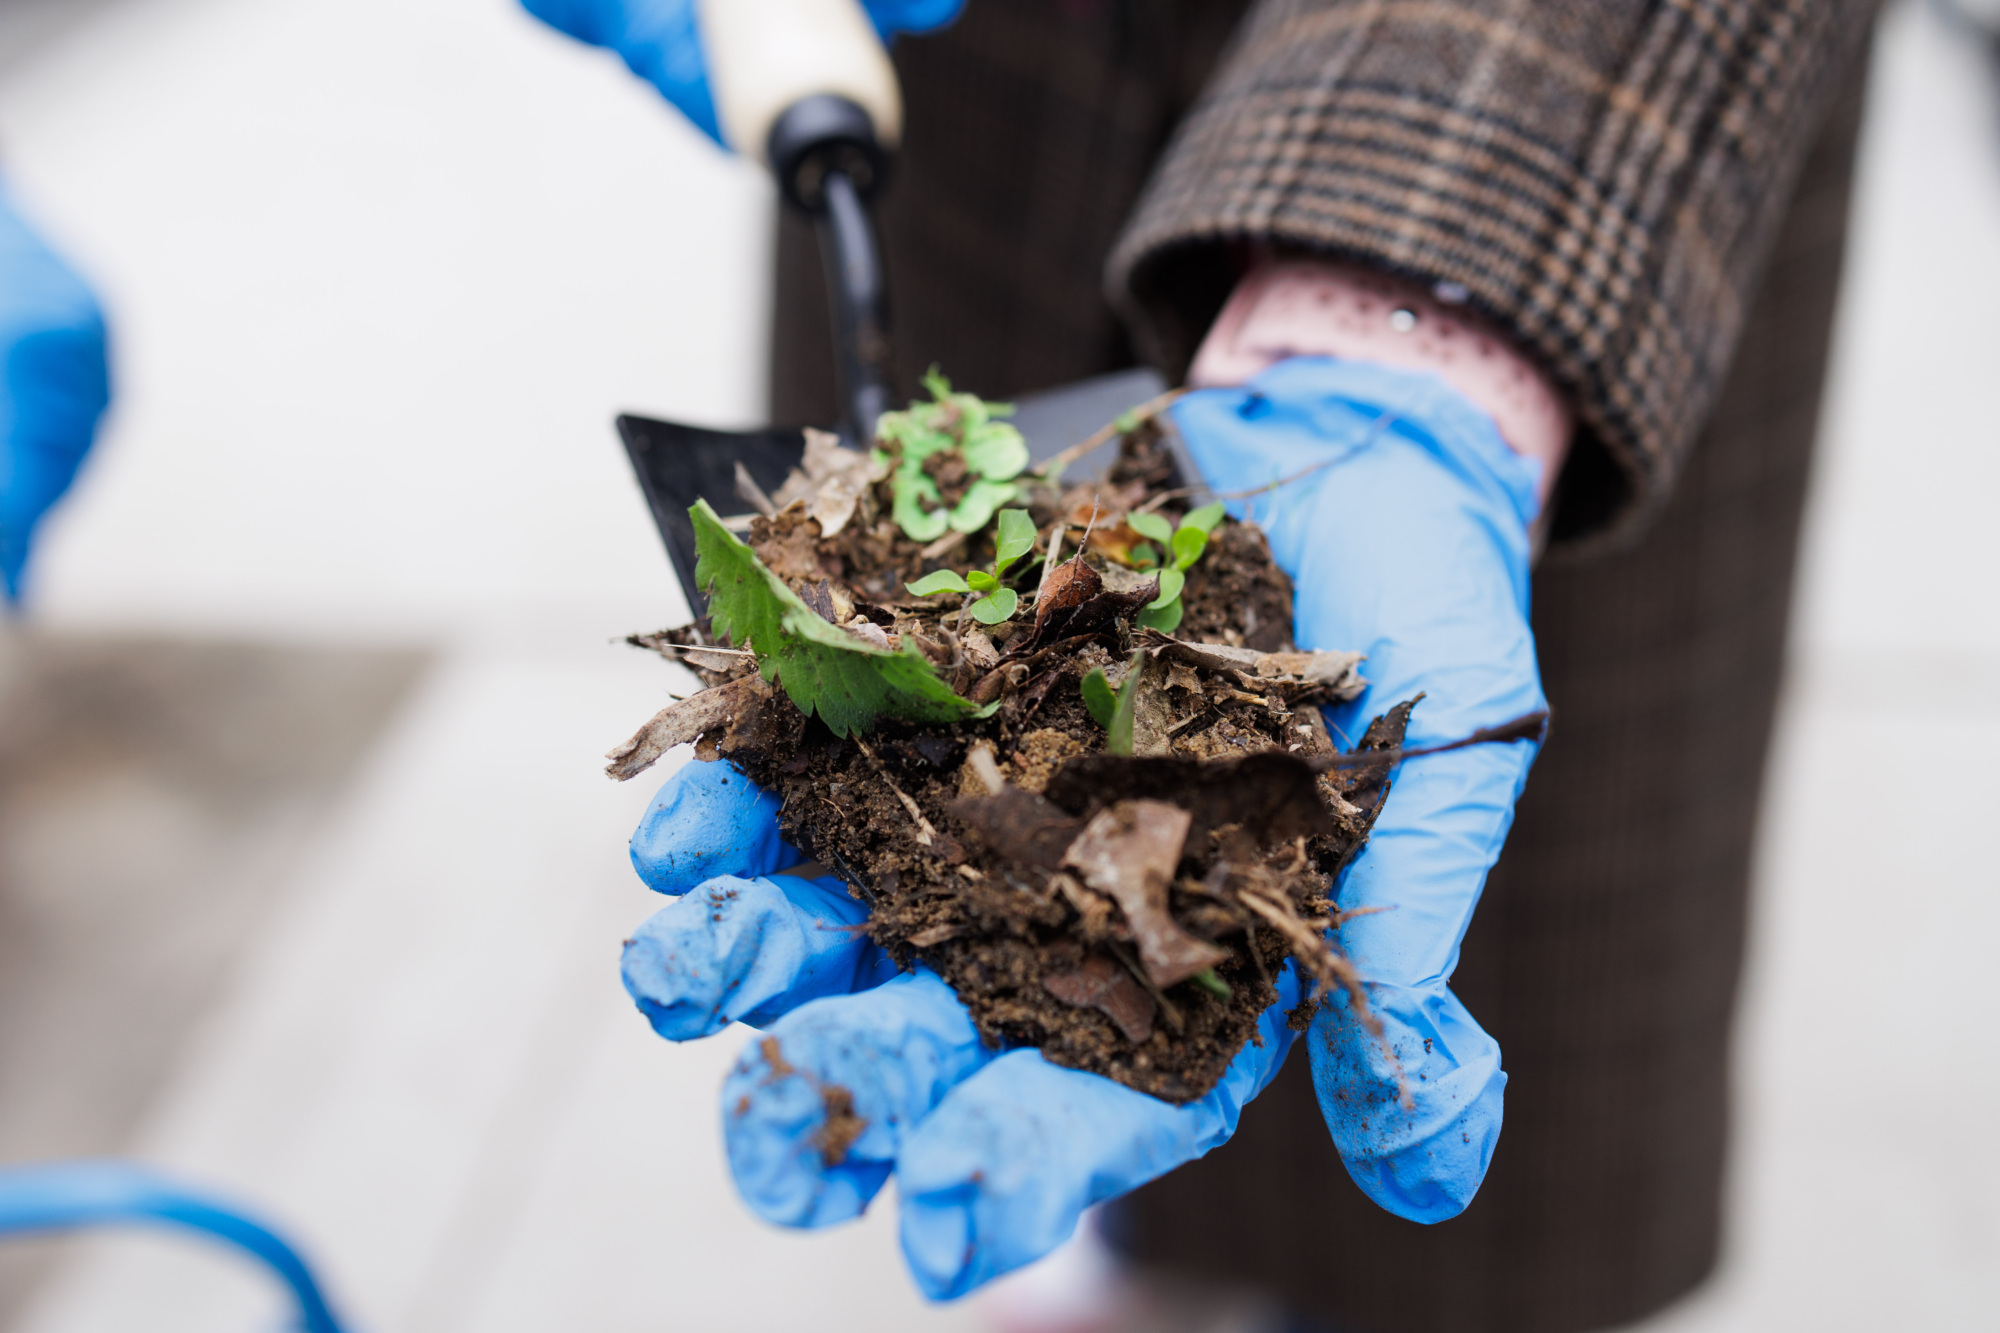 A person wearing blue gloves holds a small plant with soil in their hands, examining it closely.